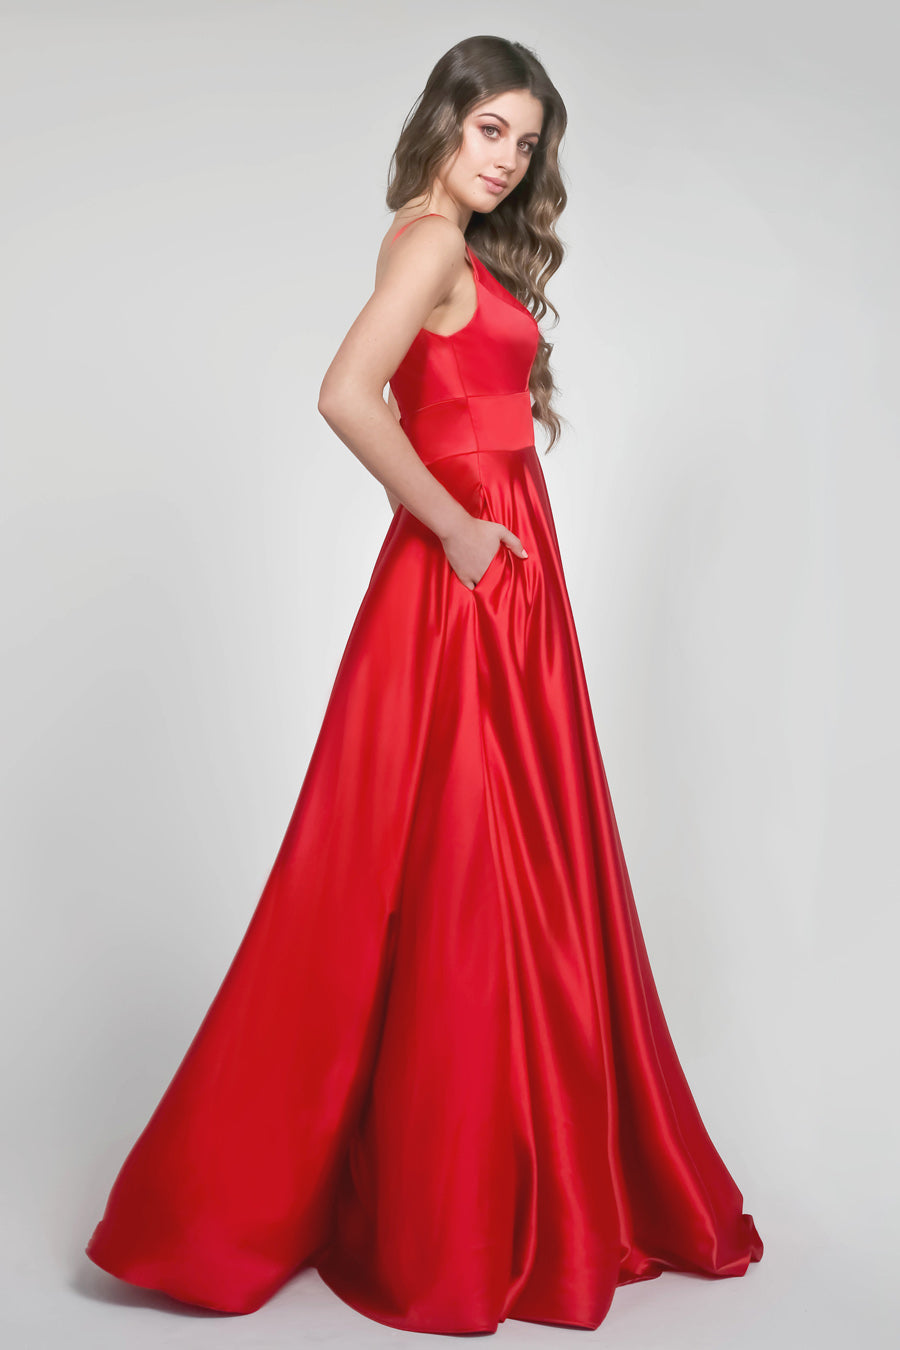 Tinaholy Couture Designer BA269 Red Satin Formal Dress Tina Holly Couture$ AfterPay Humm ZipPay LayBuy Sezzle